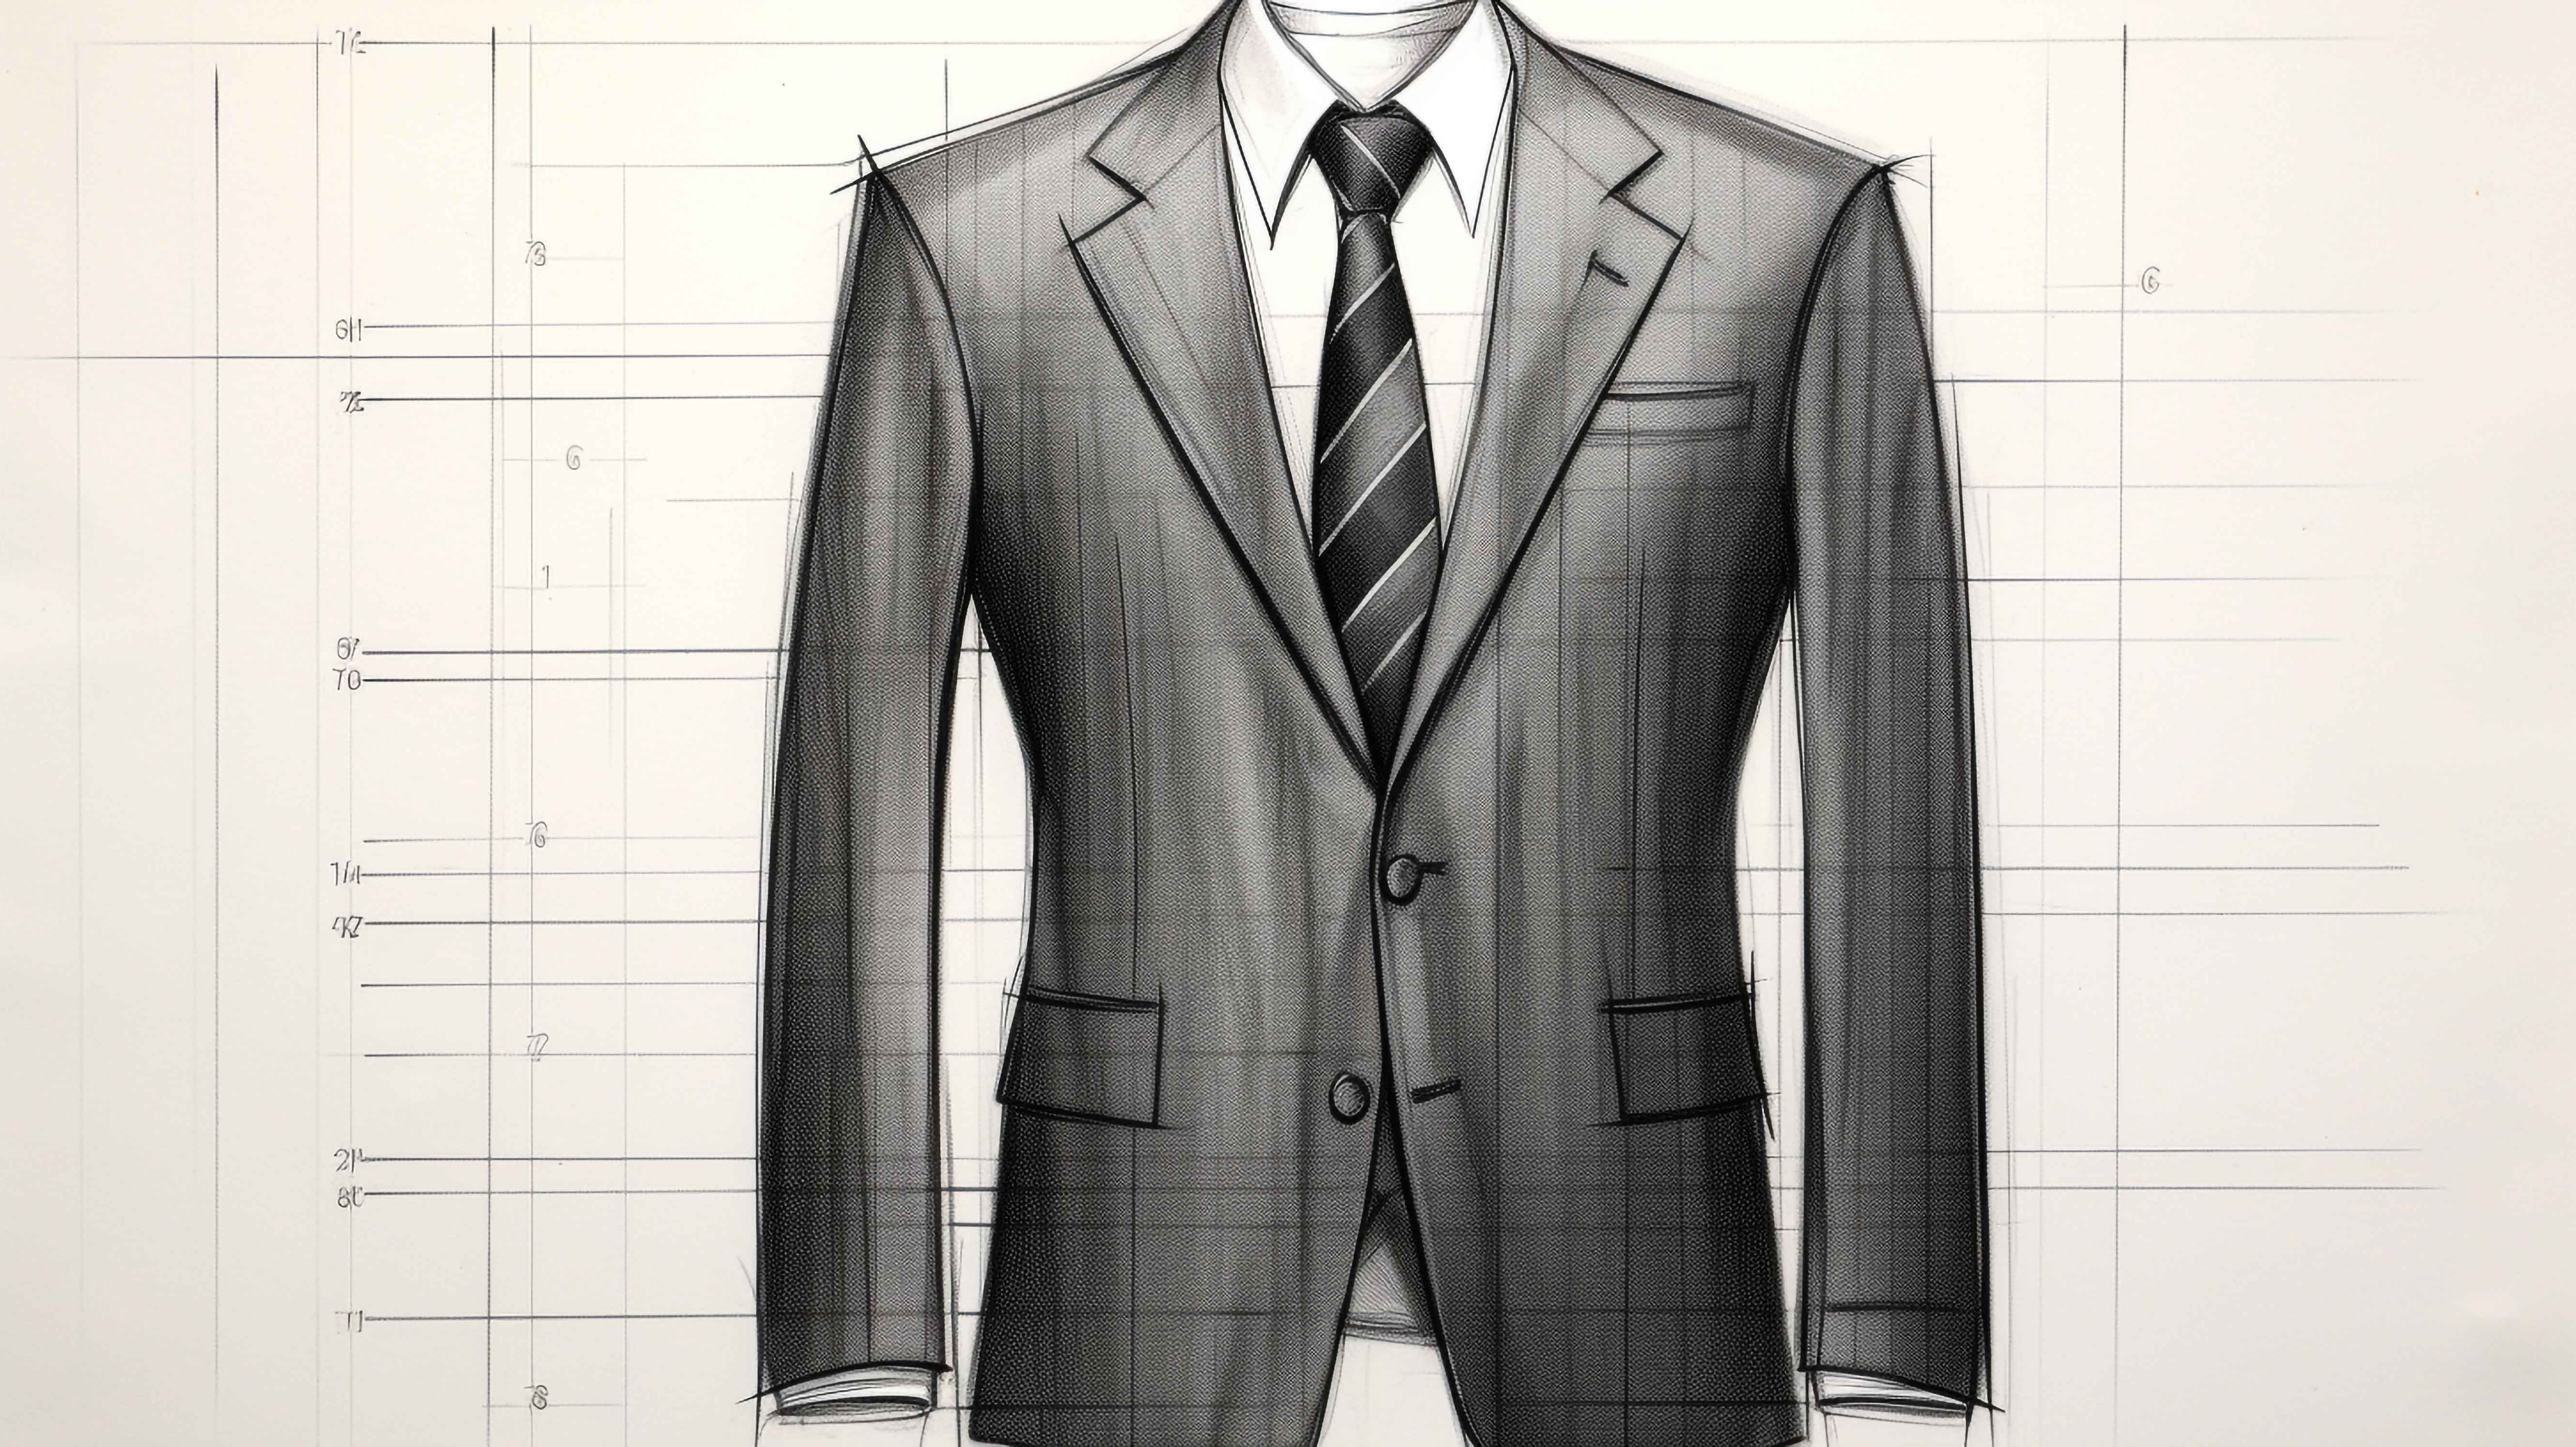 Sketch illustrating bespoke suit design, emphasizing lapel width, gorge height, and lapel length, key elements in custom tailoring